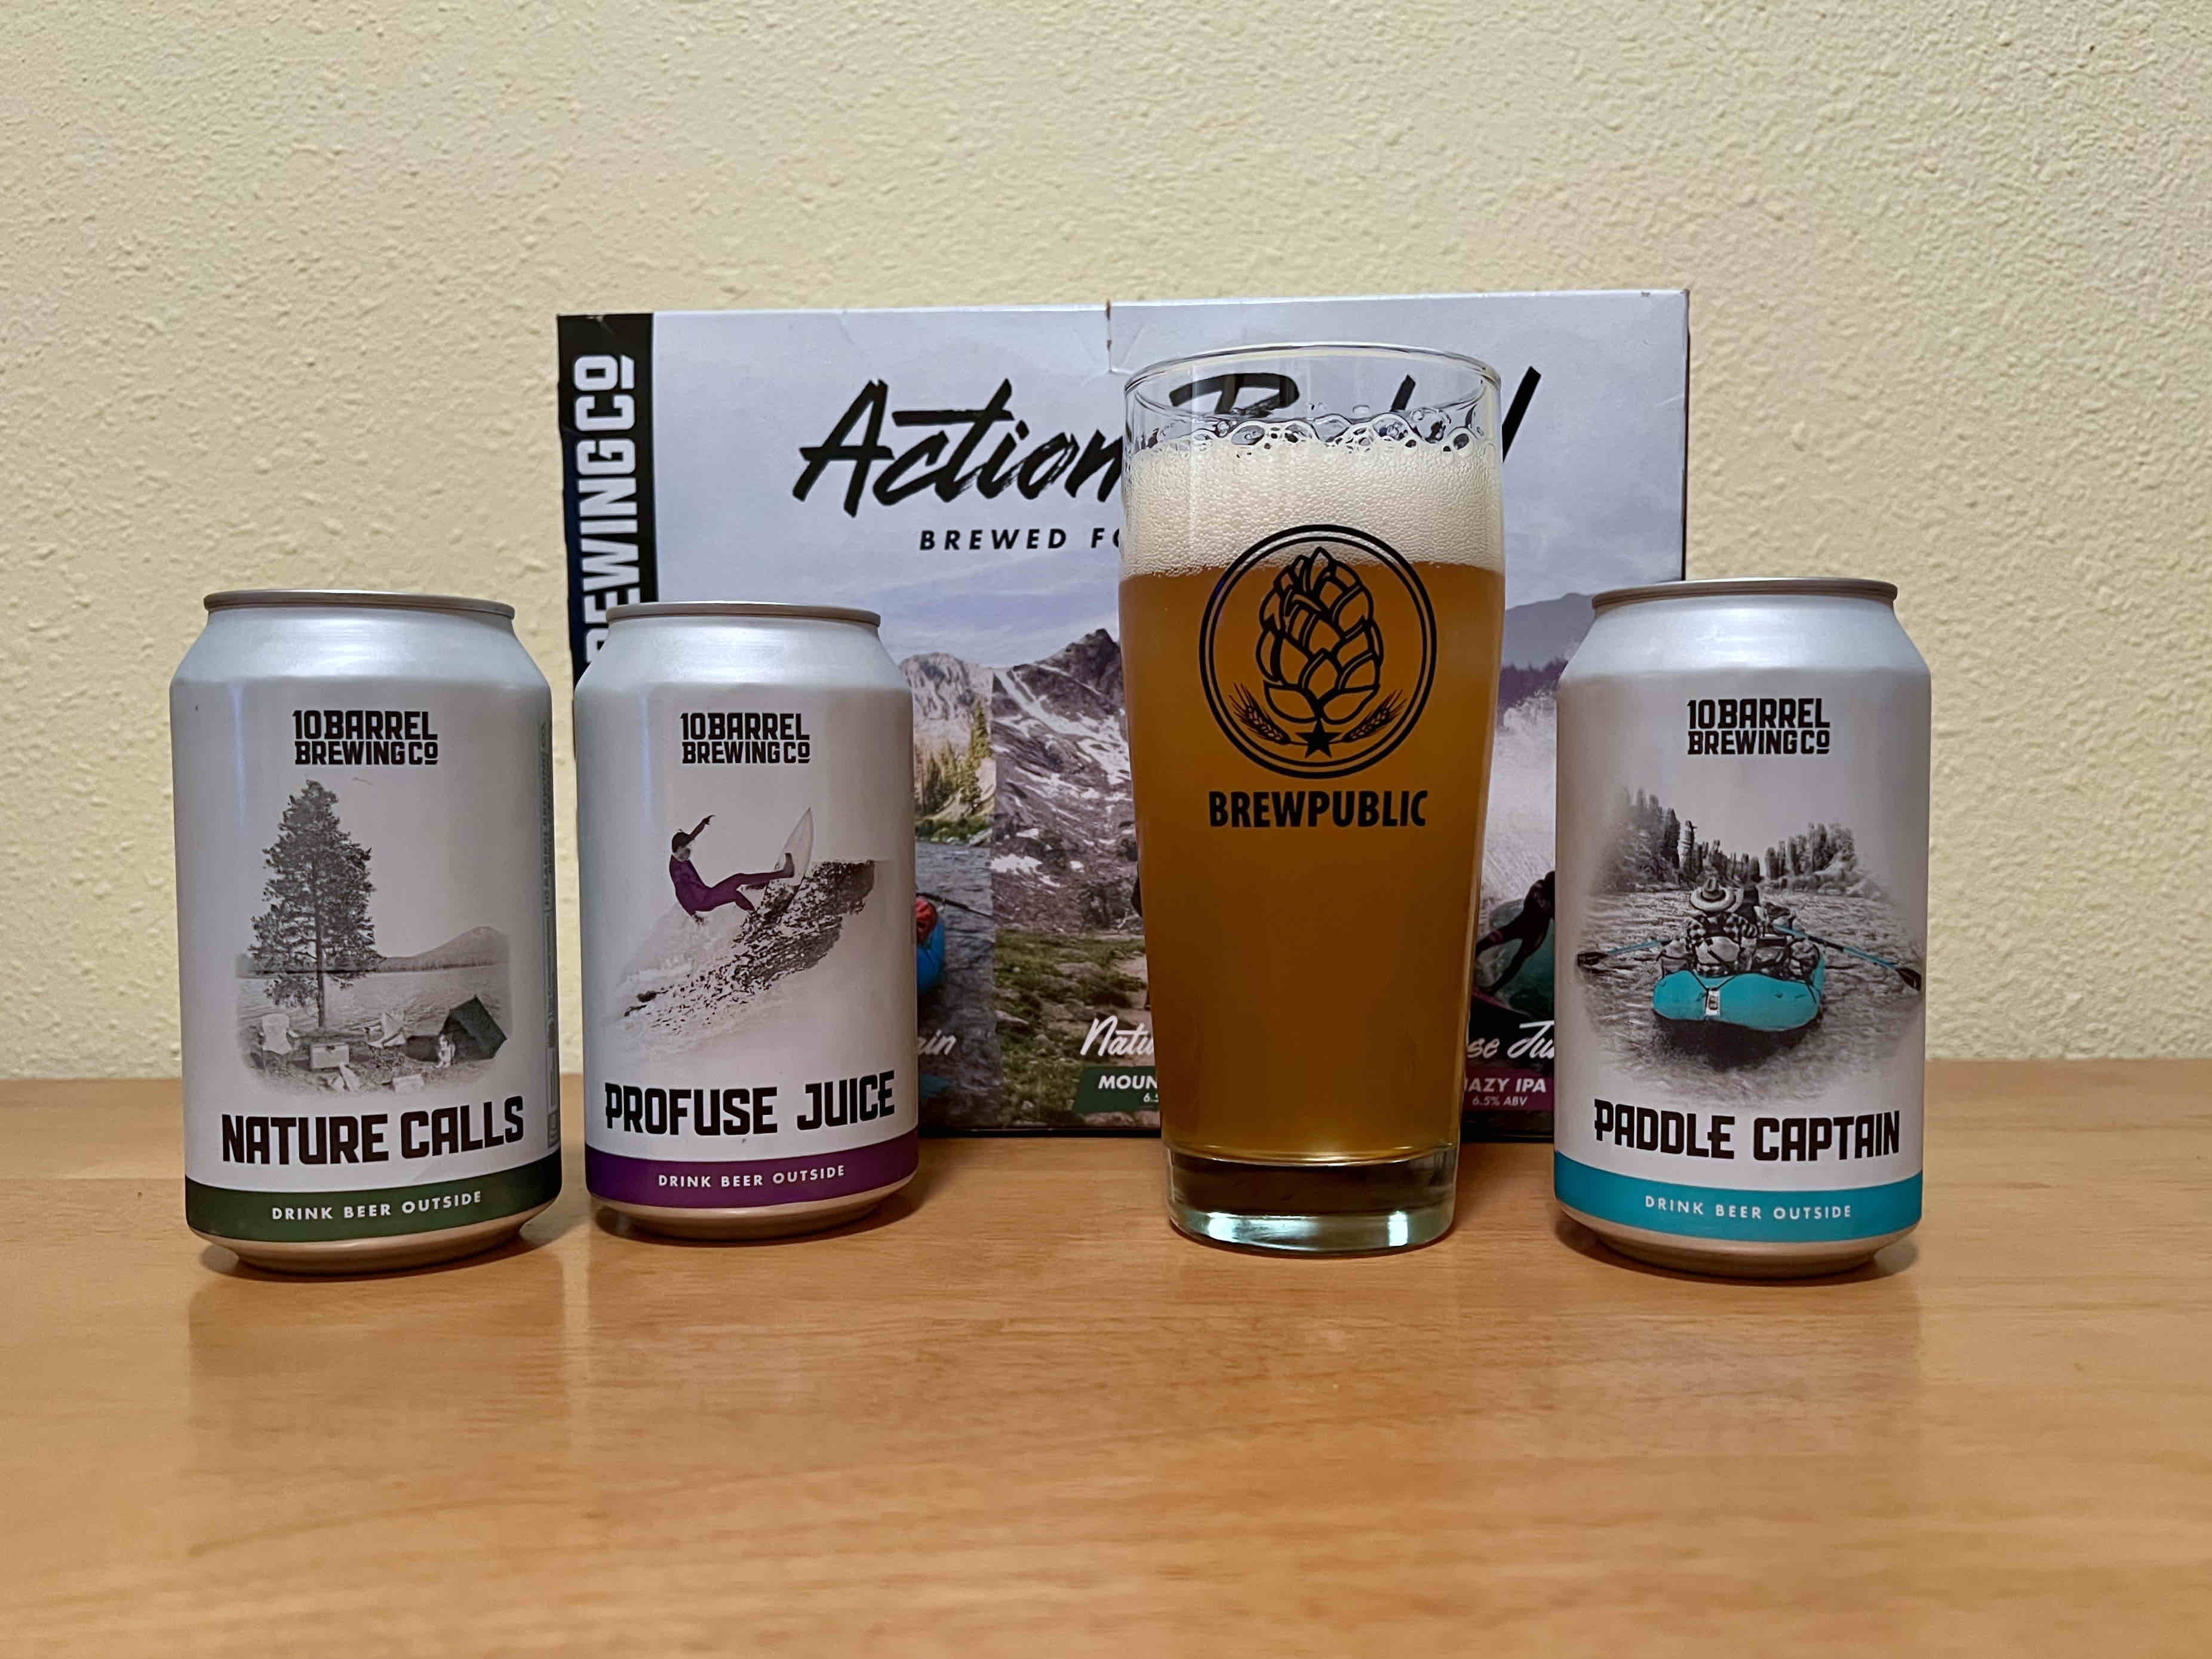 The new Action Pack'd features Nature Calls, Profuse Juice, and Paddle Captain from 10 Barrel Brewing.